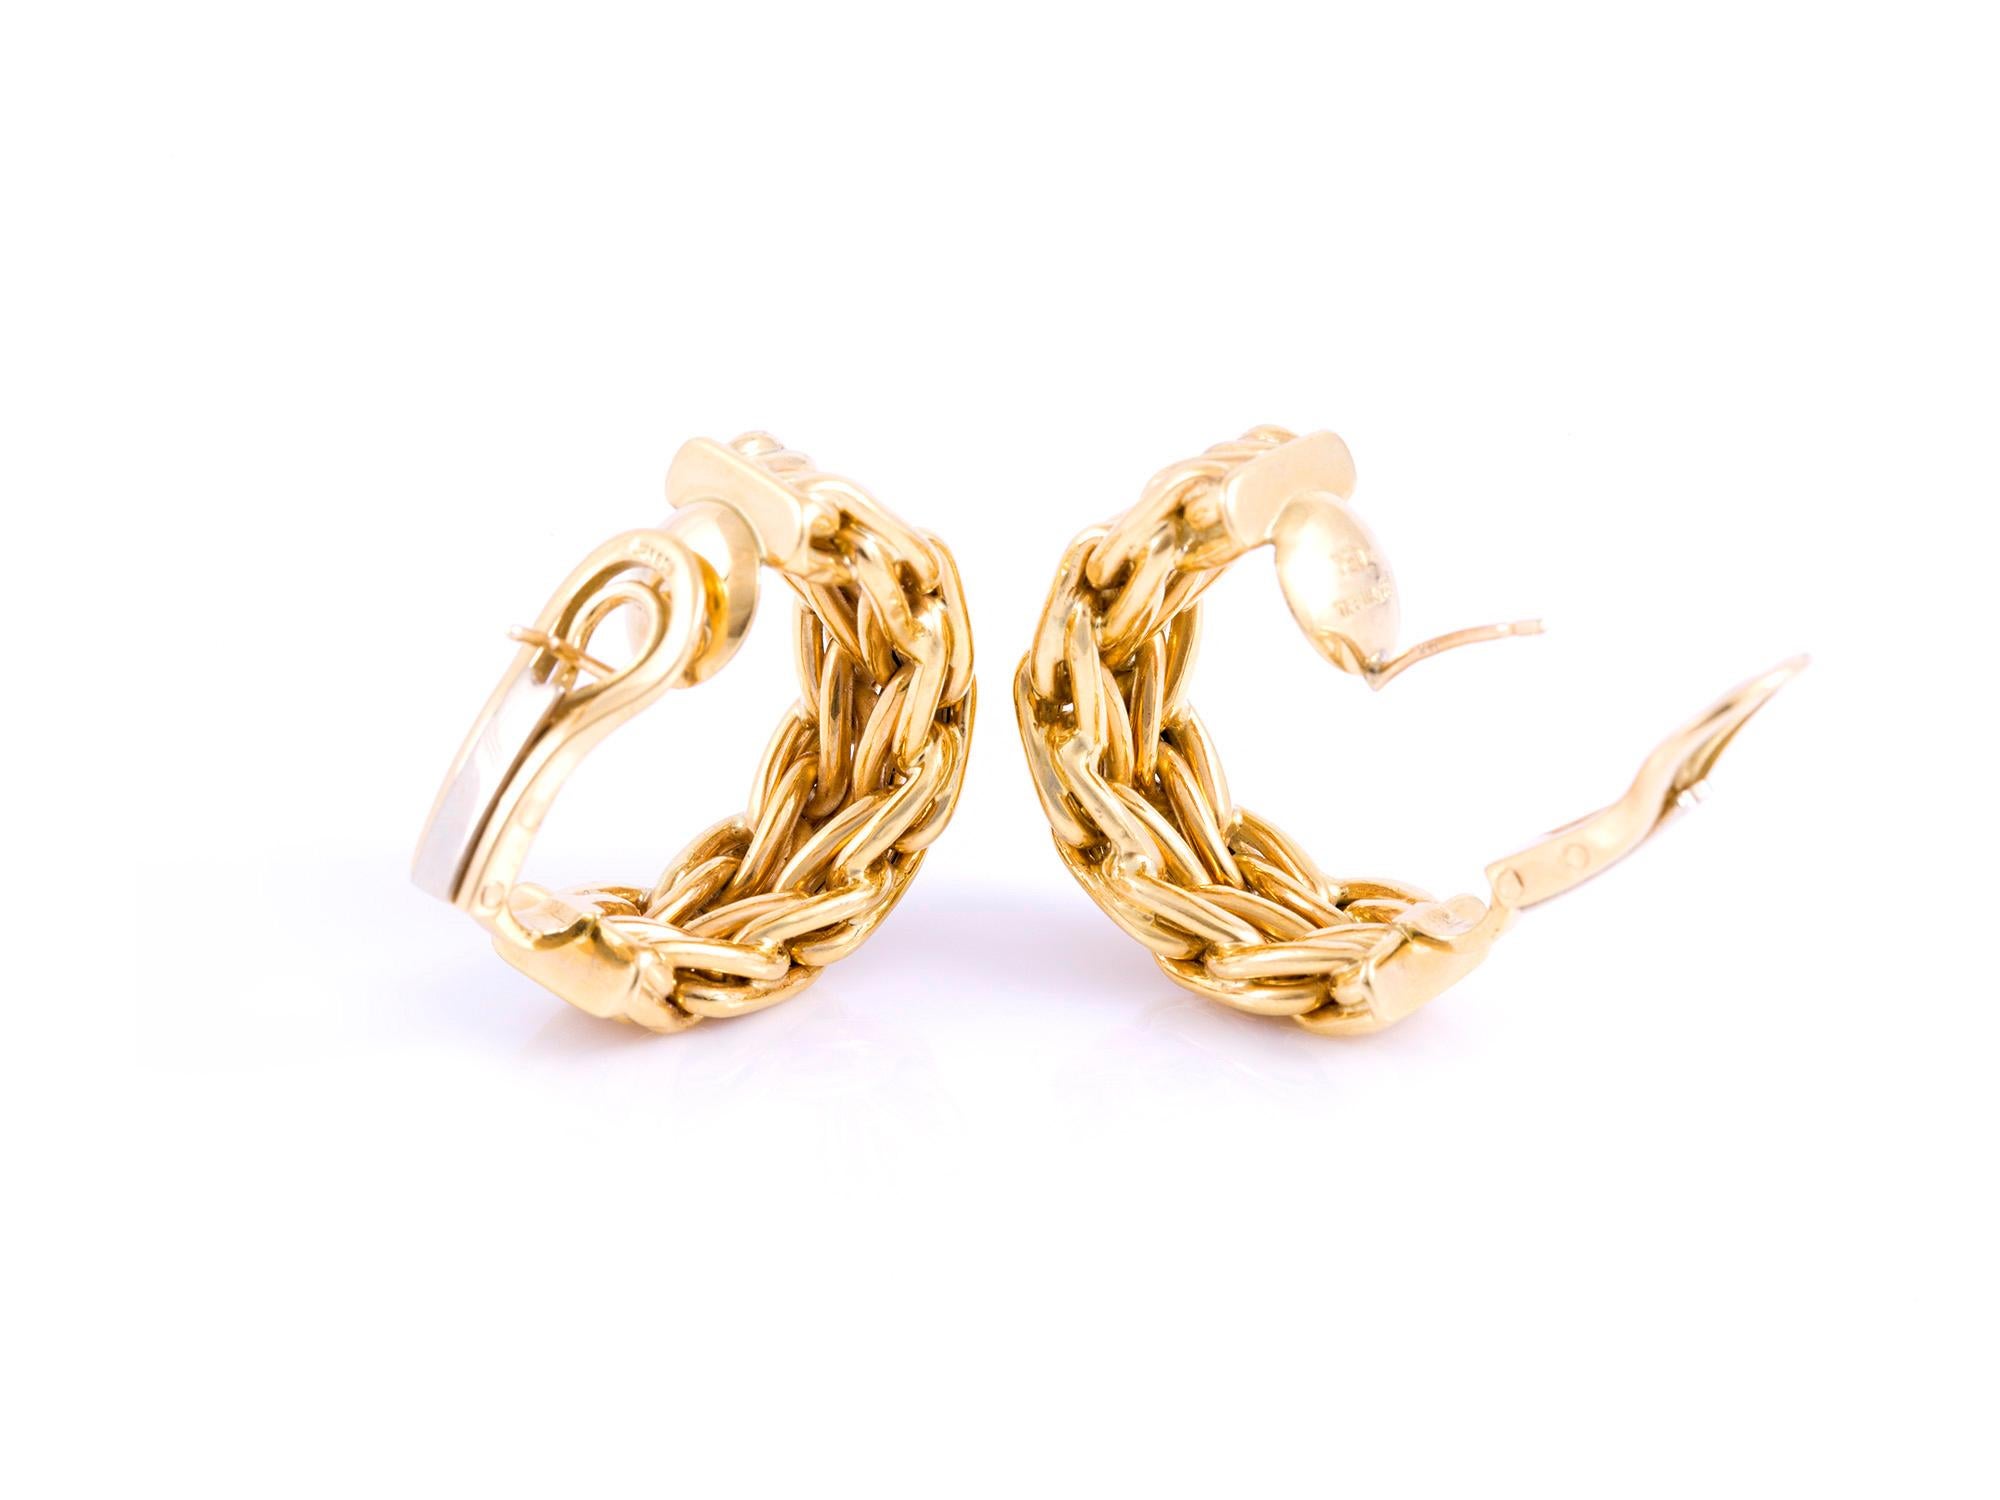 The earrings are finely crafted in 18k yellow gold and weighing approximately total of 11.21 dwt.

Signed by Tiffany & Co.